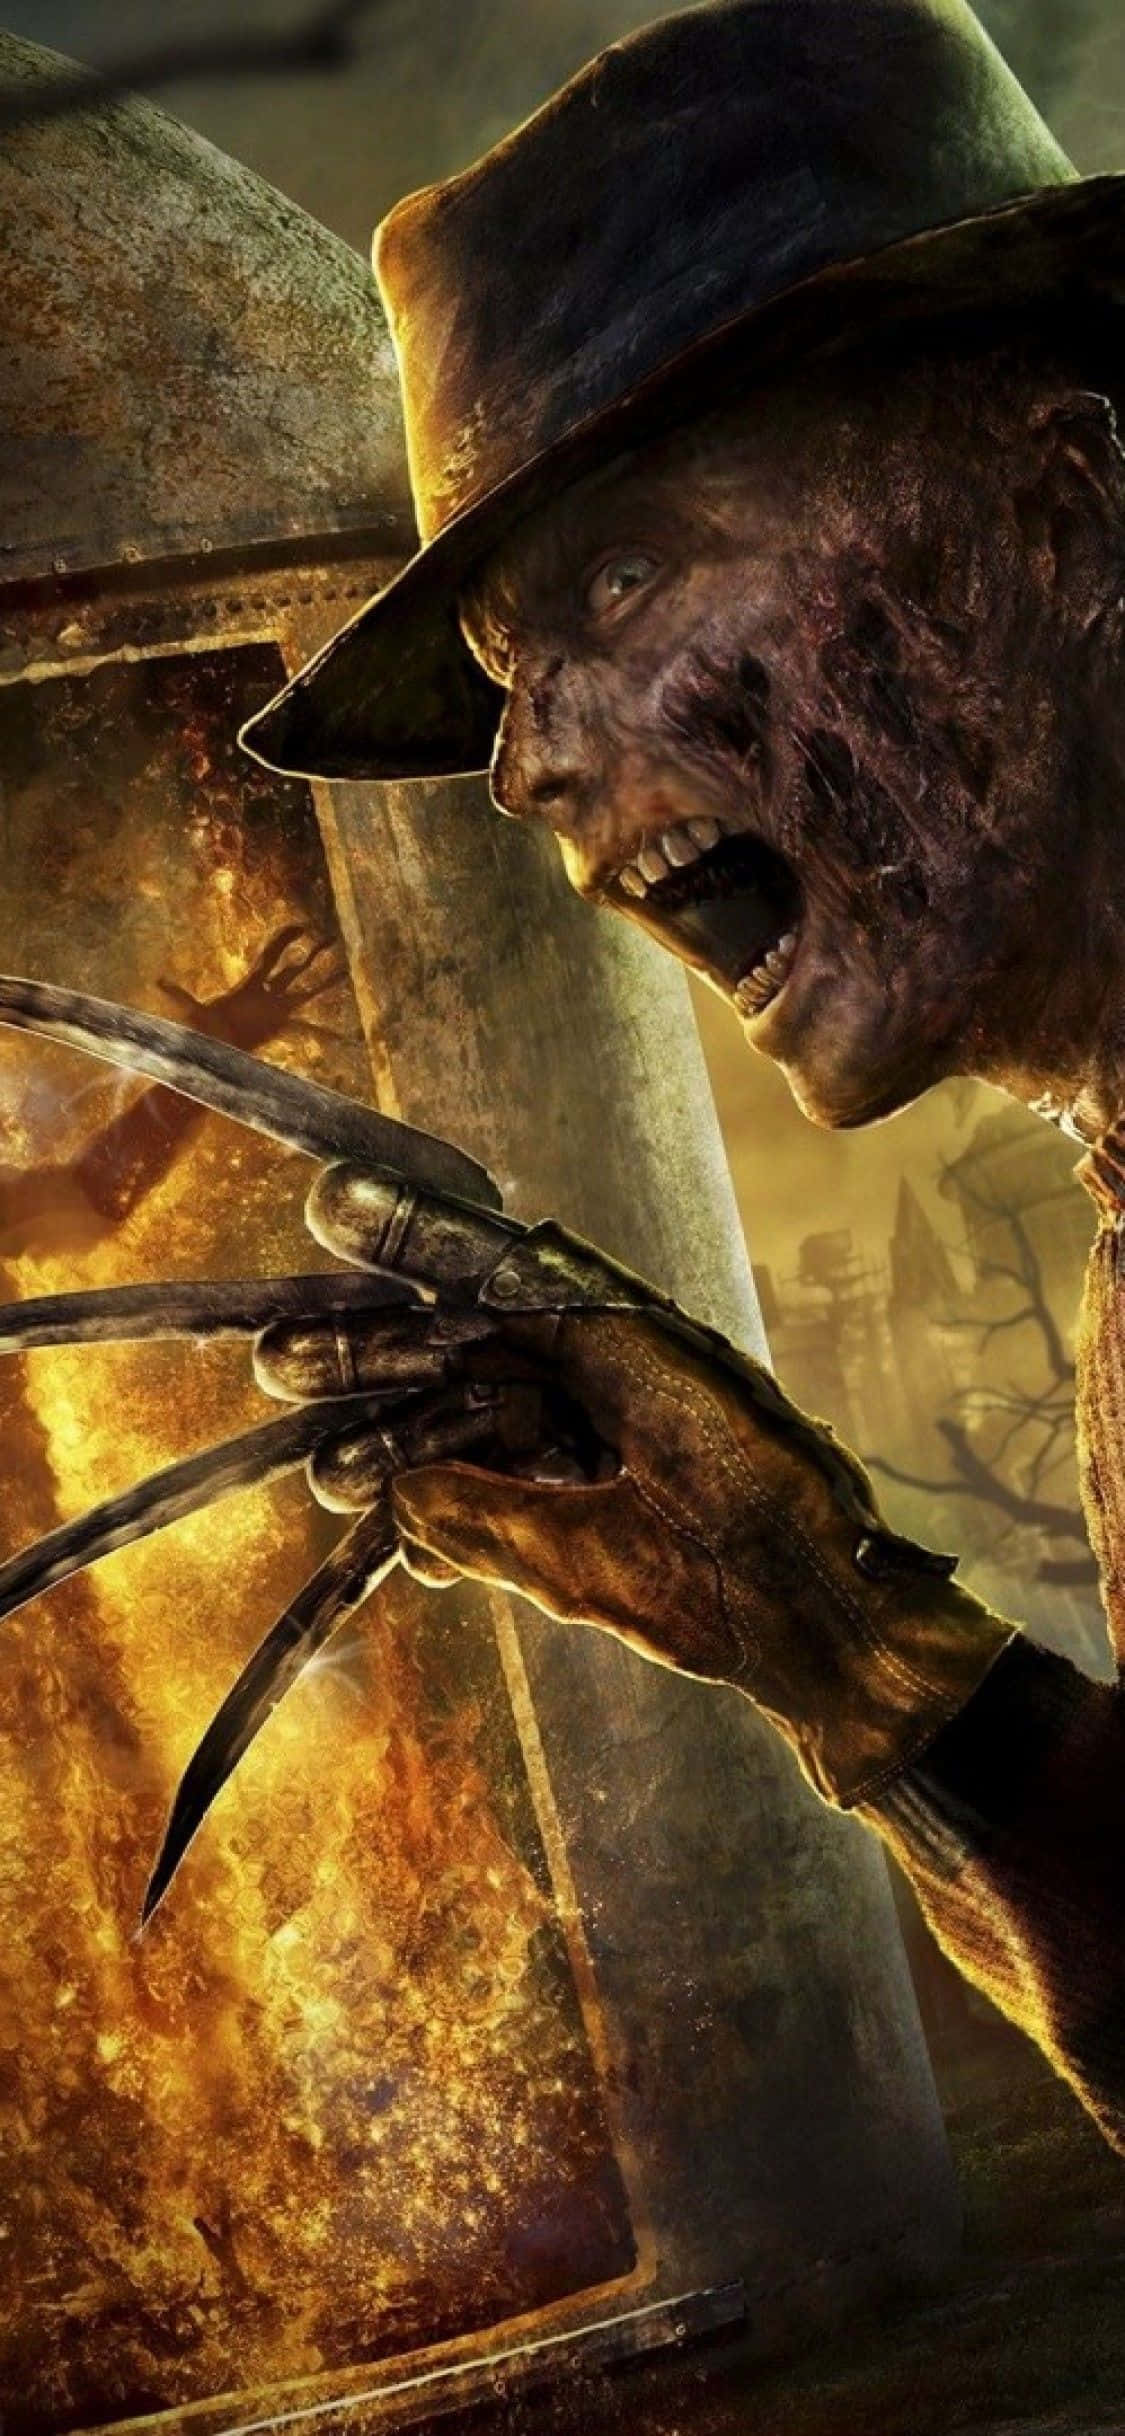 Freddy Krueger menacingly poses with his razor-sharp glove in this thrilling high-resolution background